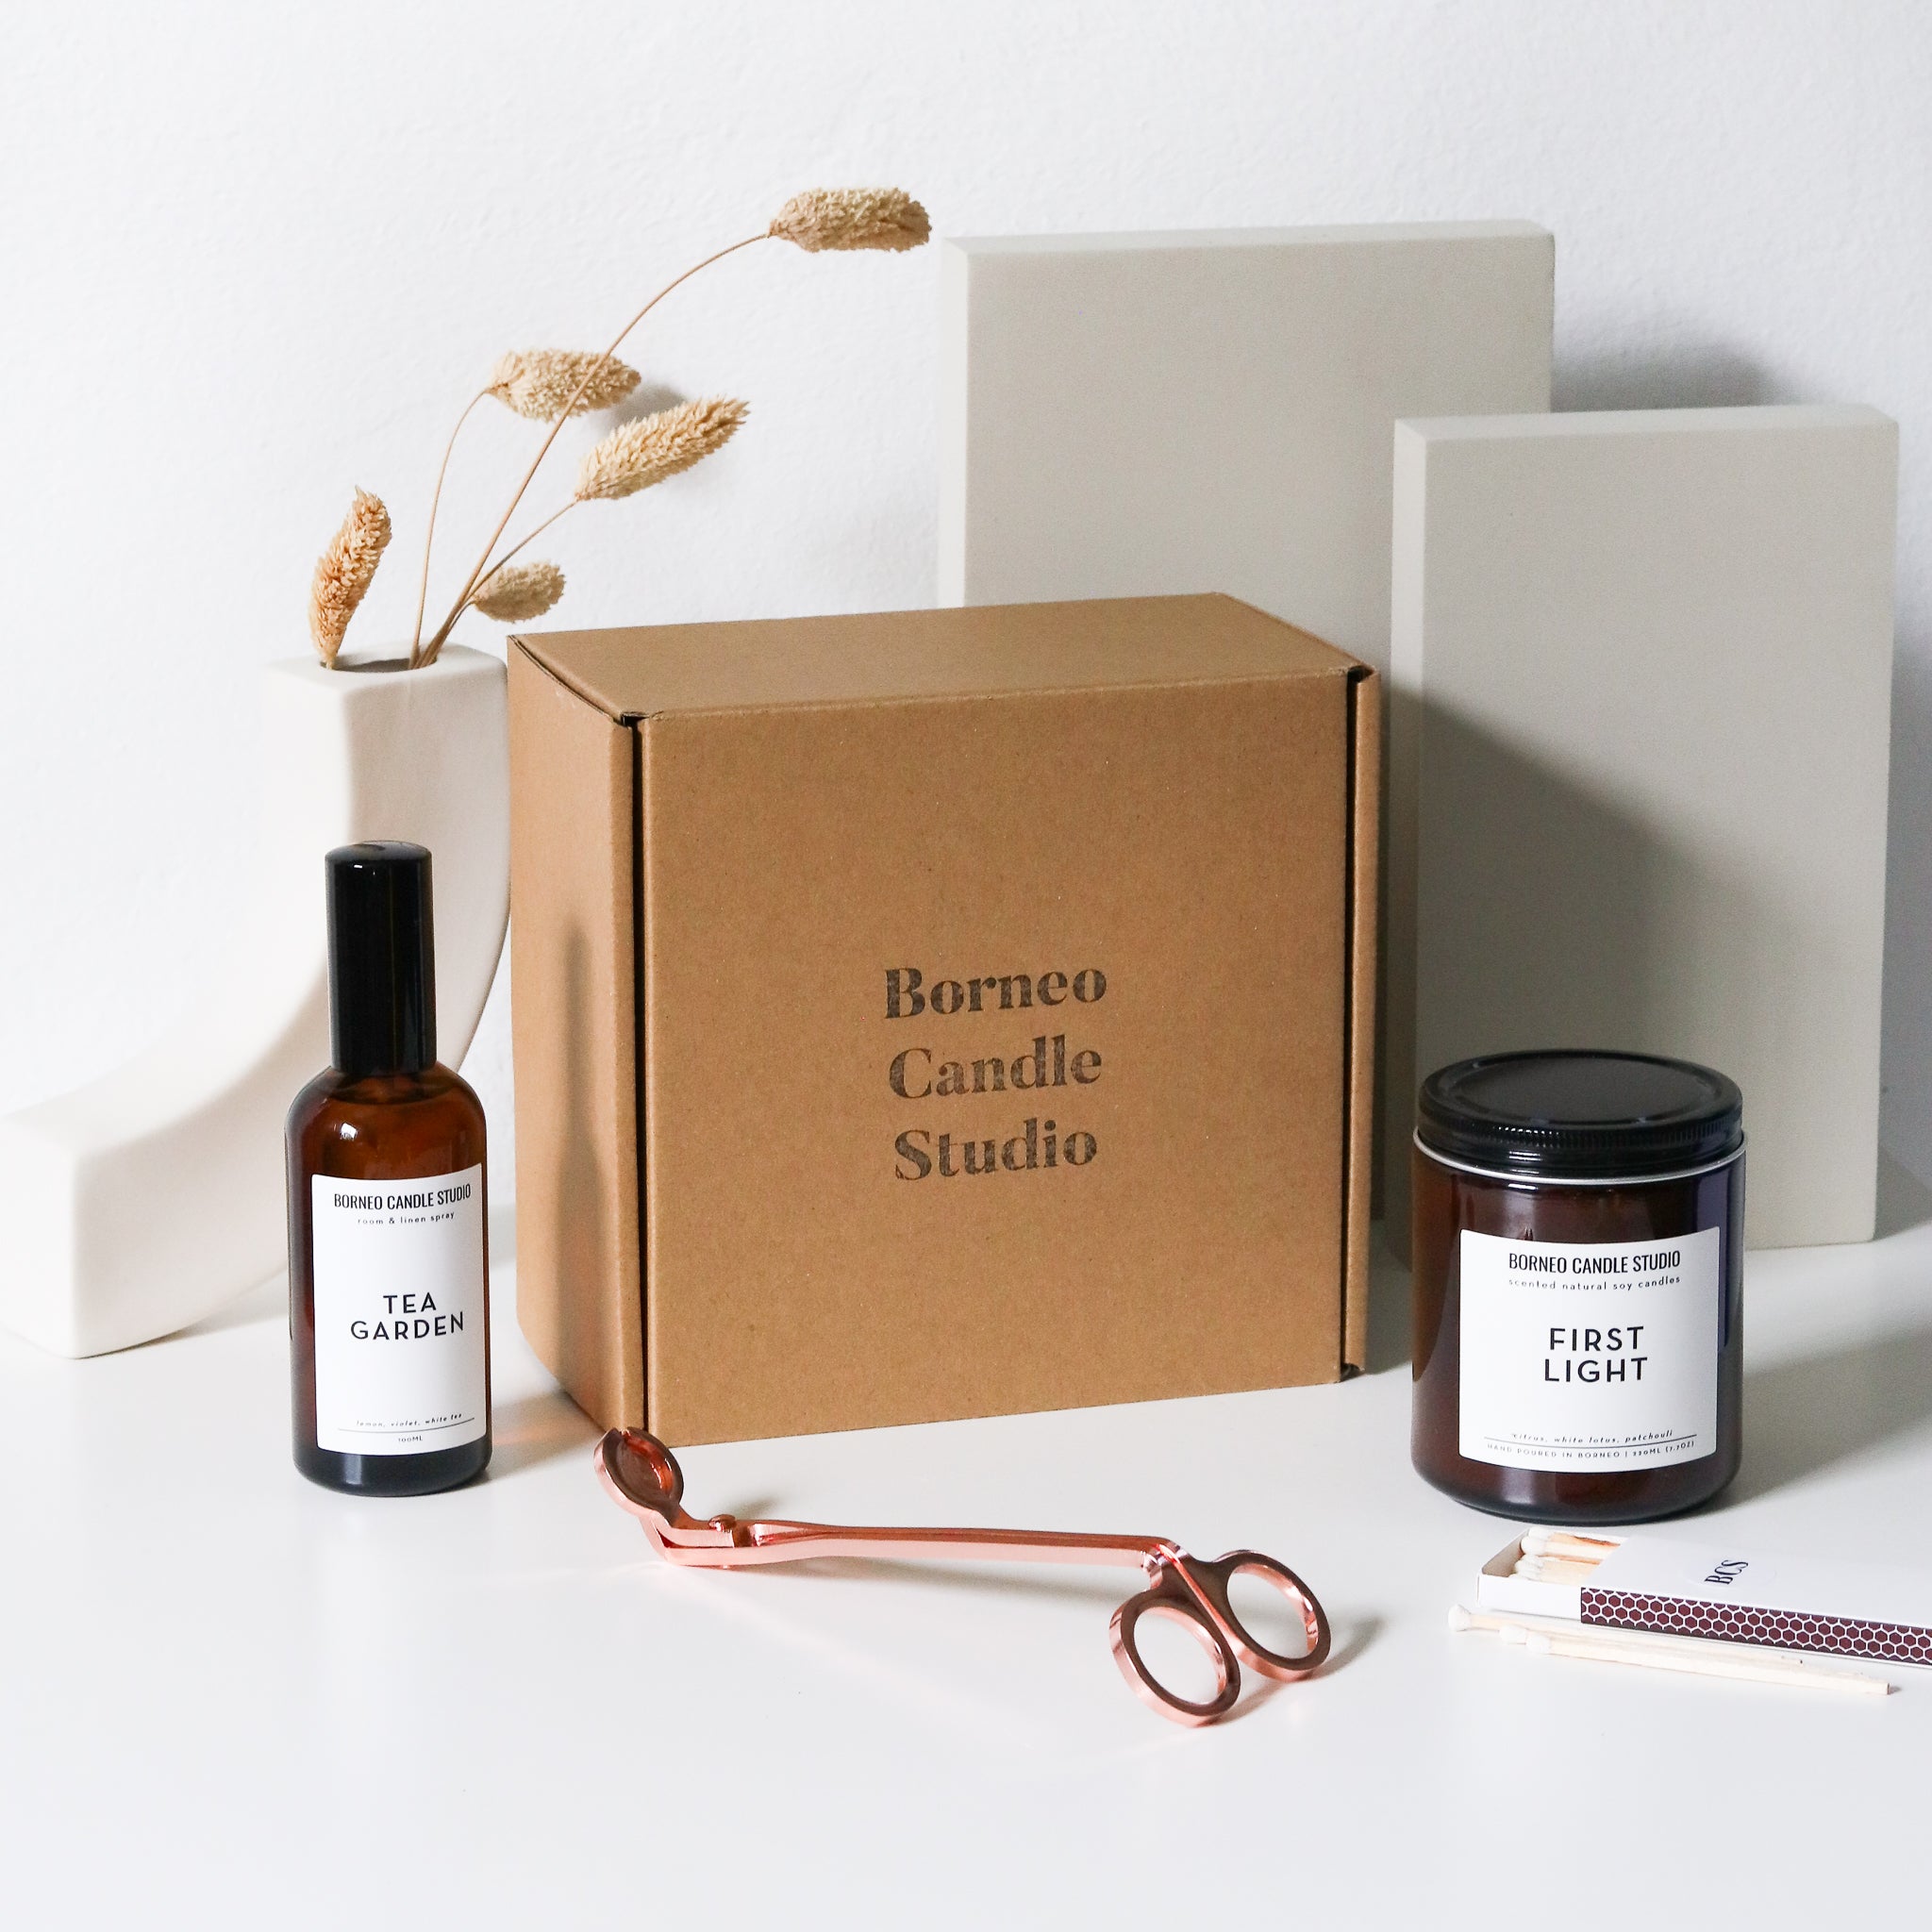 Borneo Candle Studio has candle gift set service in Malaysia that can be customised to include scented candles, candle accessories, room & linen spray.